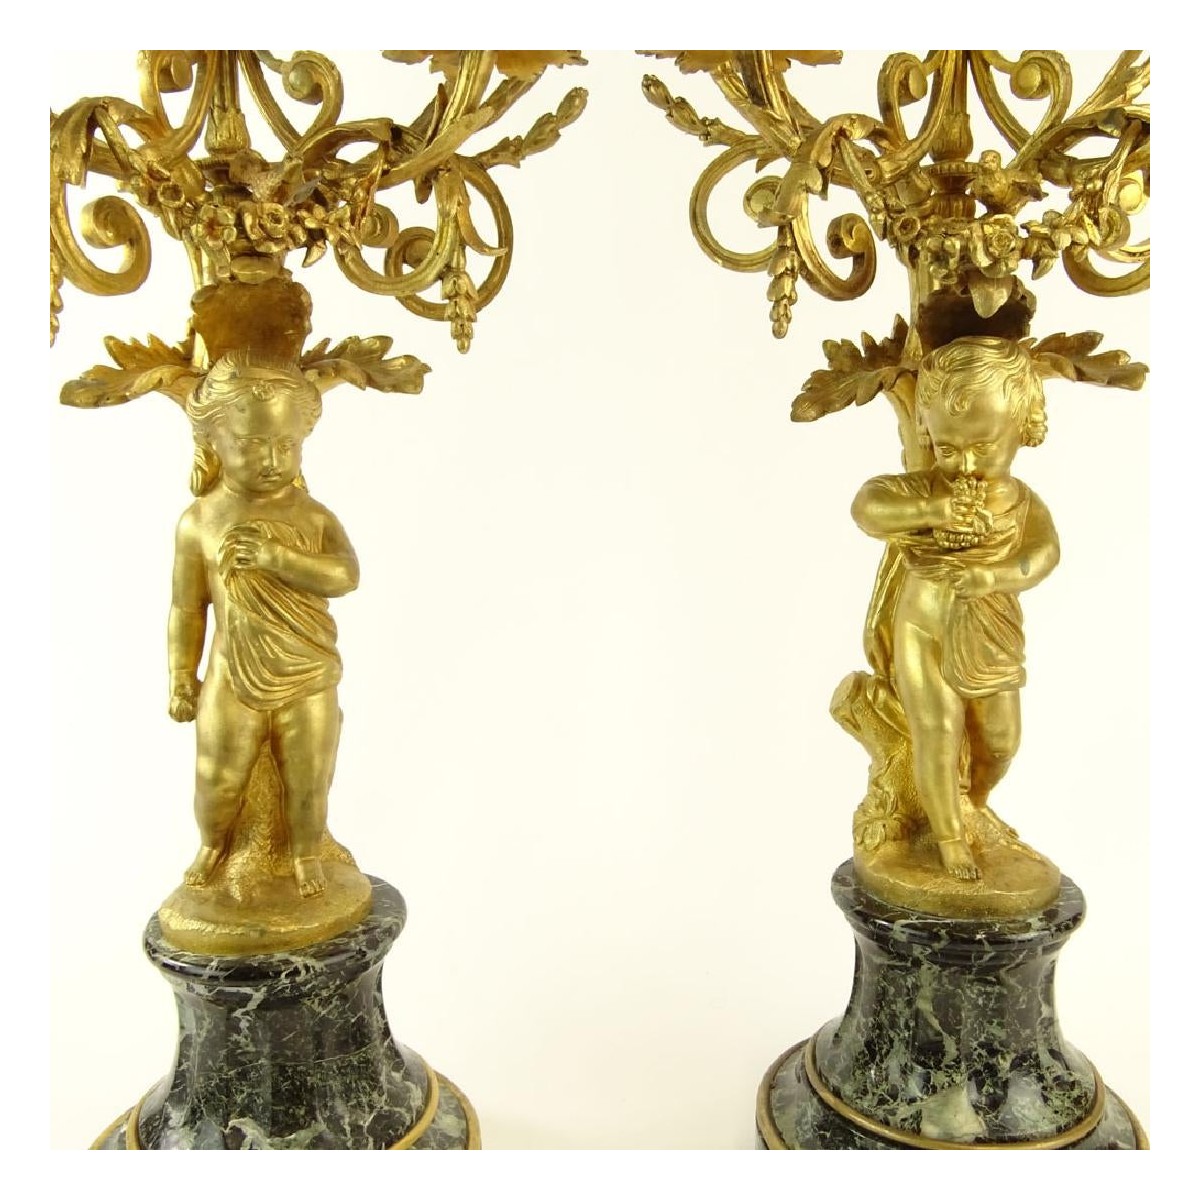 Early 20th C. Five Light Candelabra